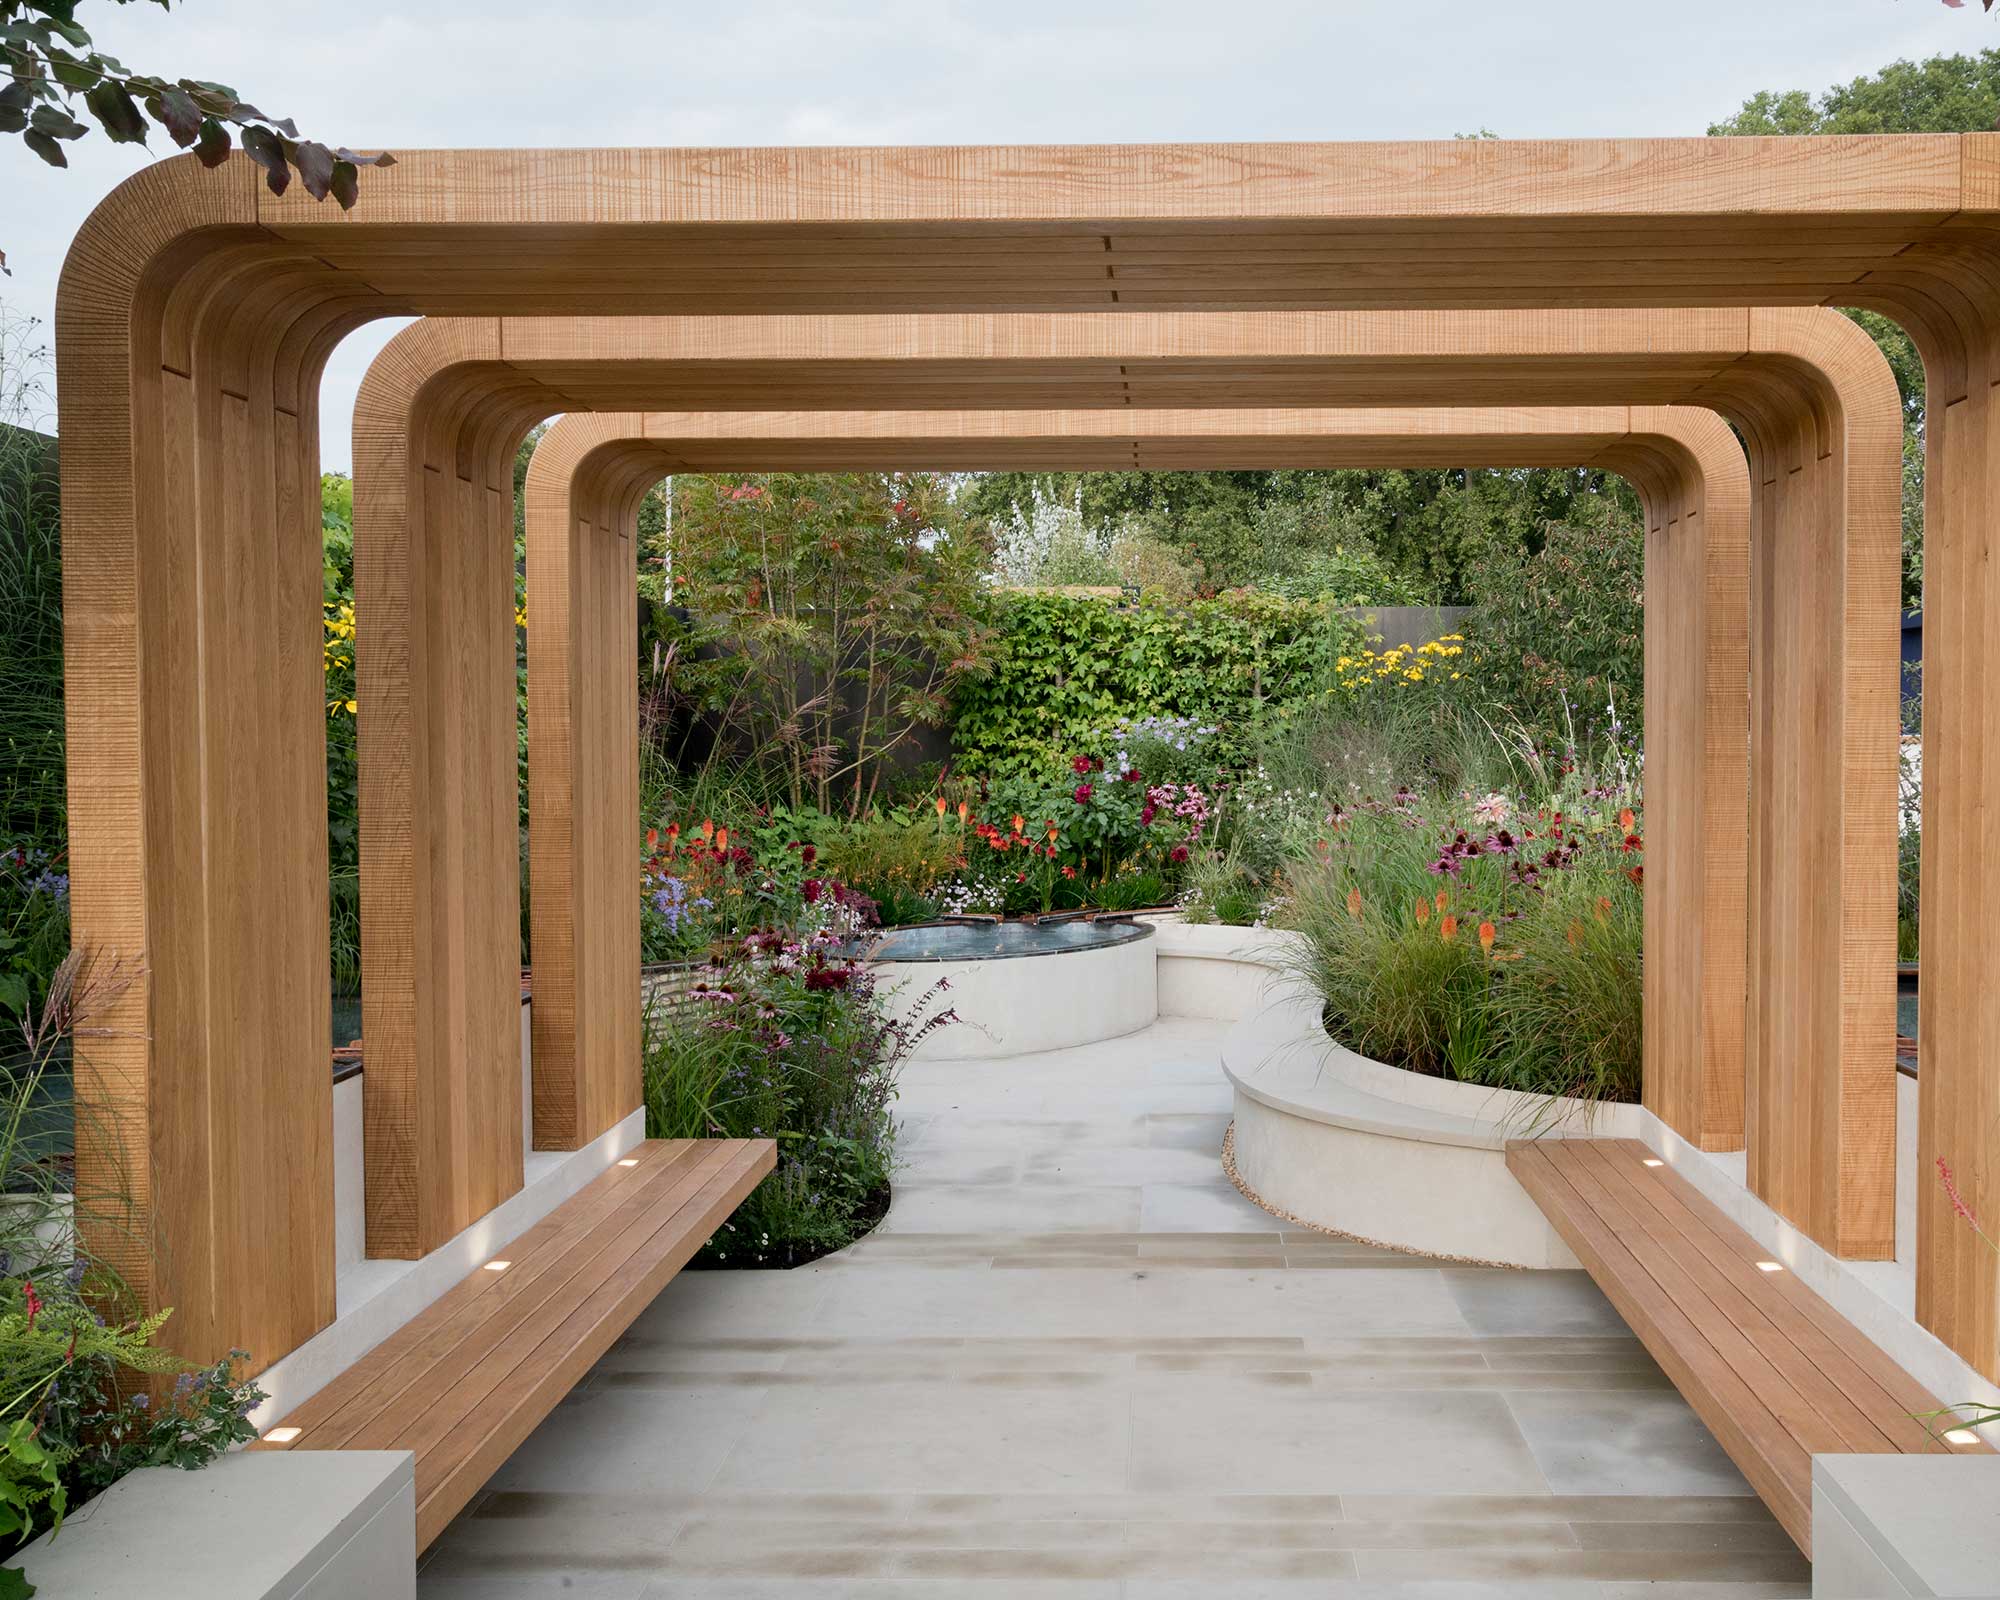 timber overhead patio cover at Chelsea Flower Show 2021